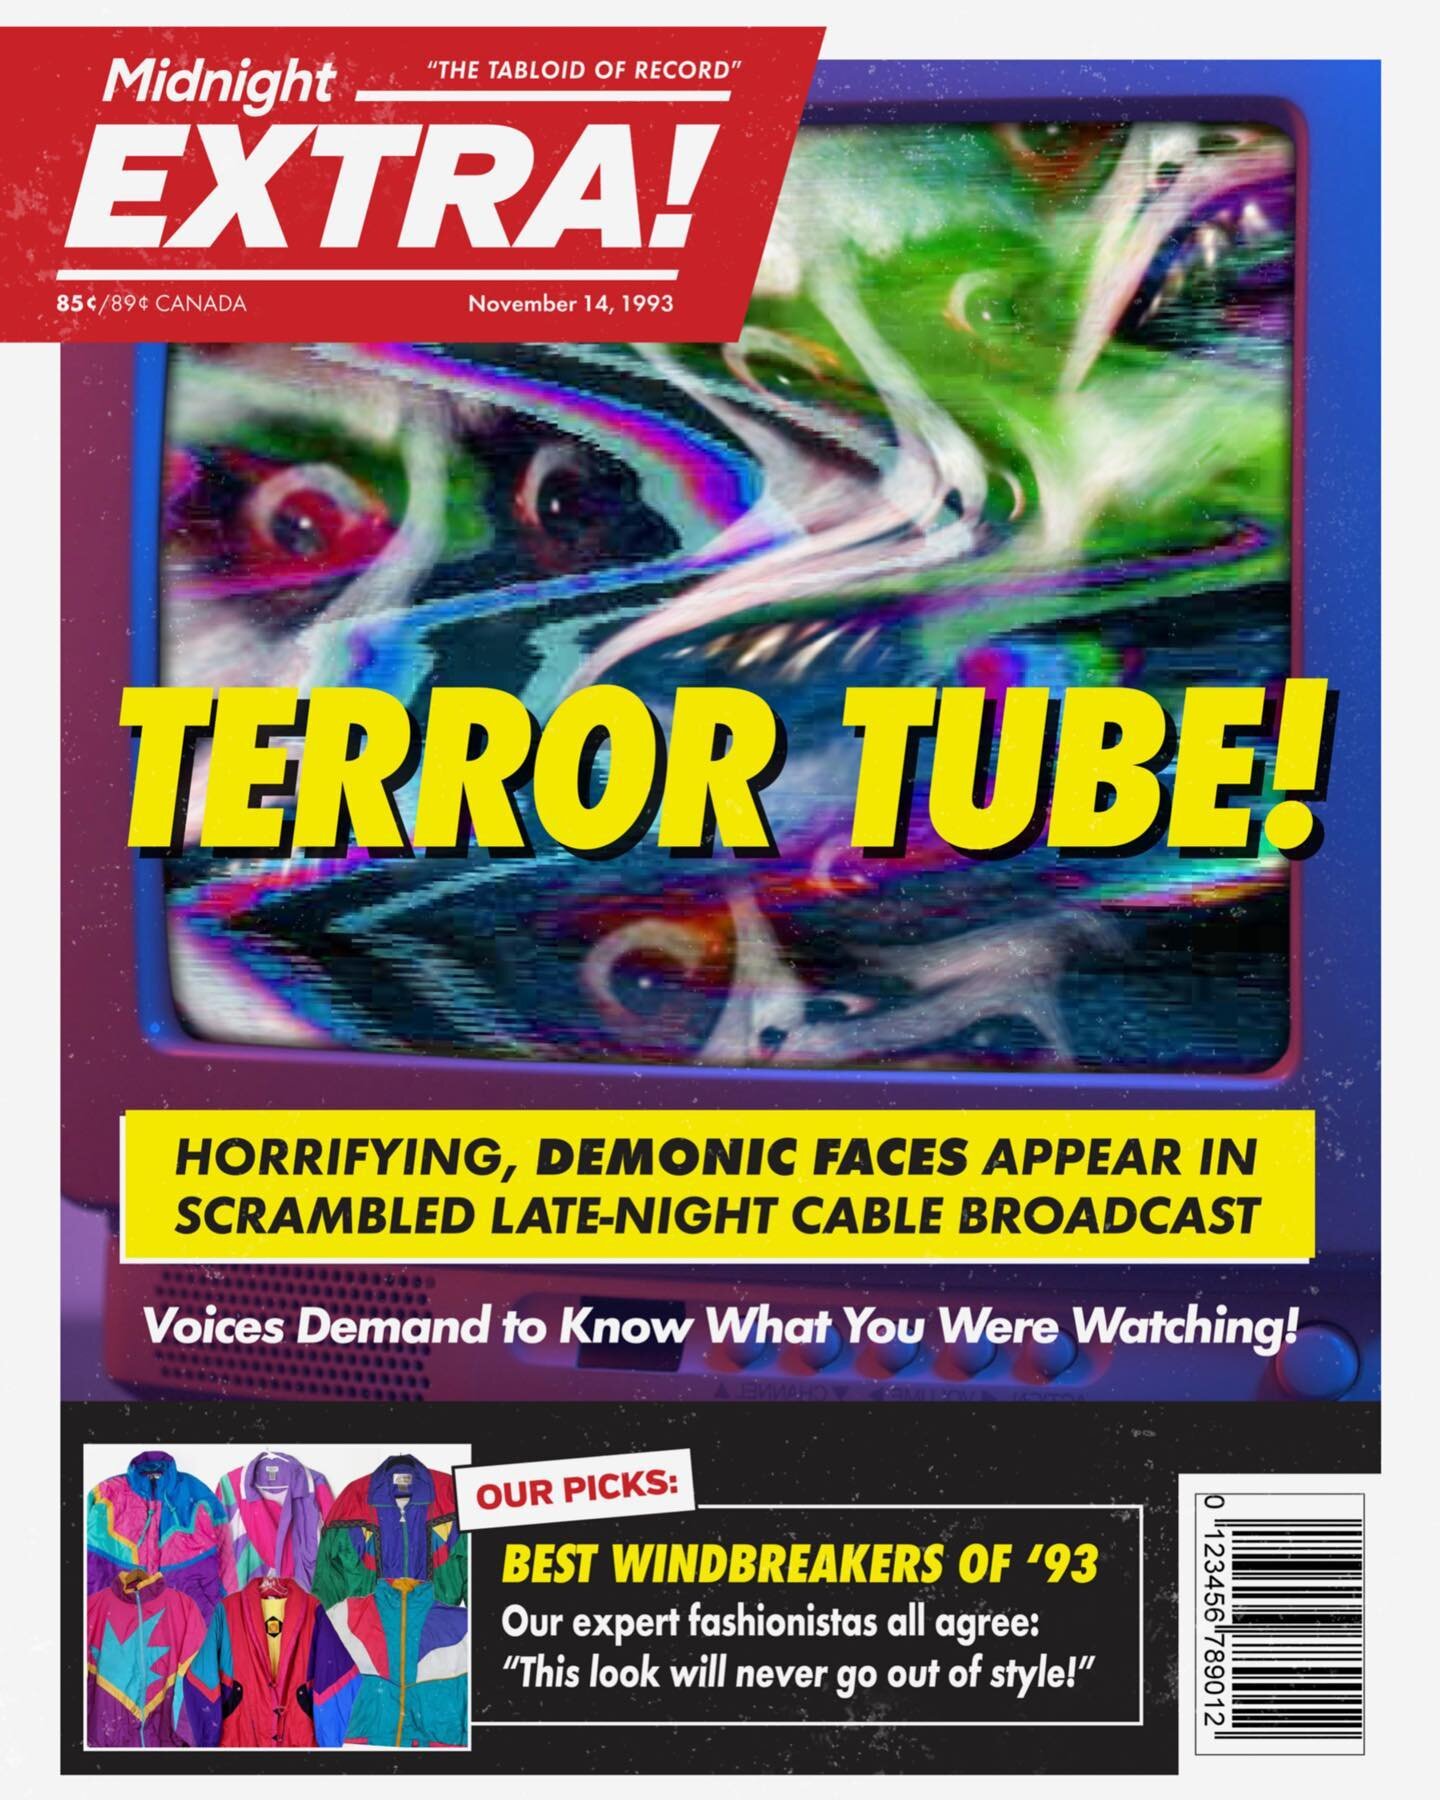 TELE-TERROR from 1993! Anonymous, adolescent readers report DEMONIC FACES appearing among the scrambled signals of LATE NIGHT PREMIUM CABLE! What at first appeared to be wavy, discolored blobs of AMOROUS COUPLES turned out to be something FAR MORE SI